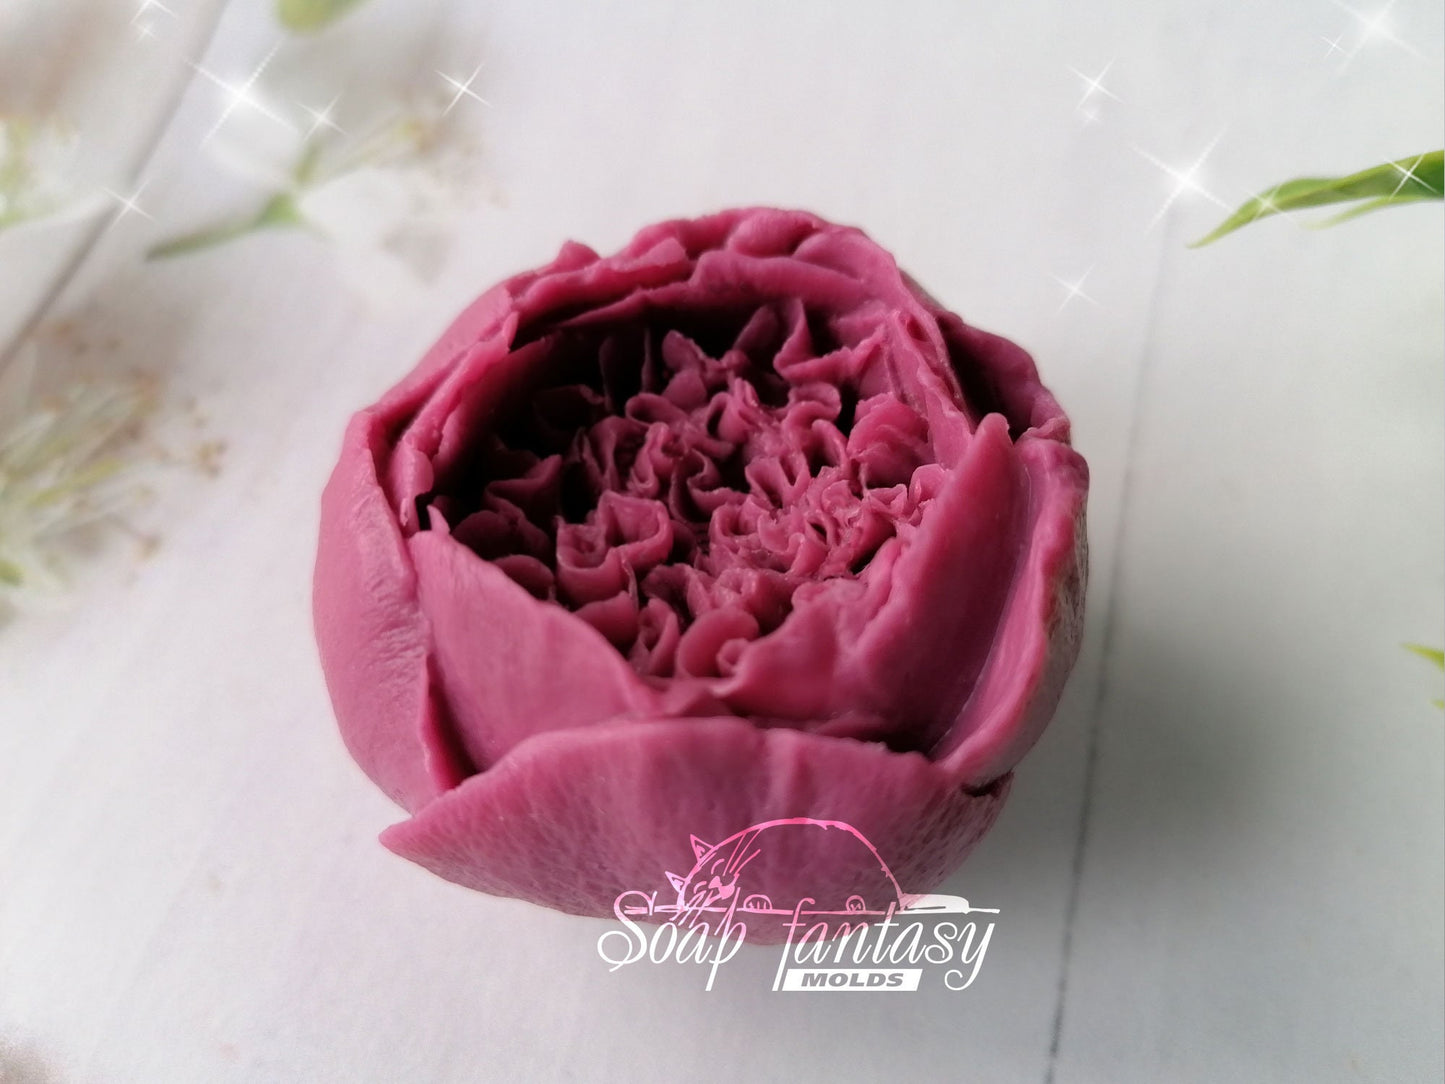 Peony bud "King" silicone mold for soap making